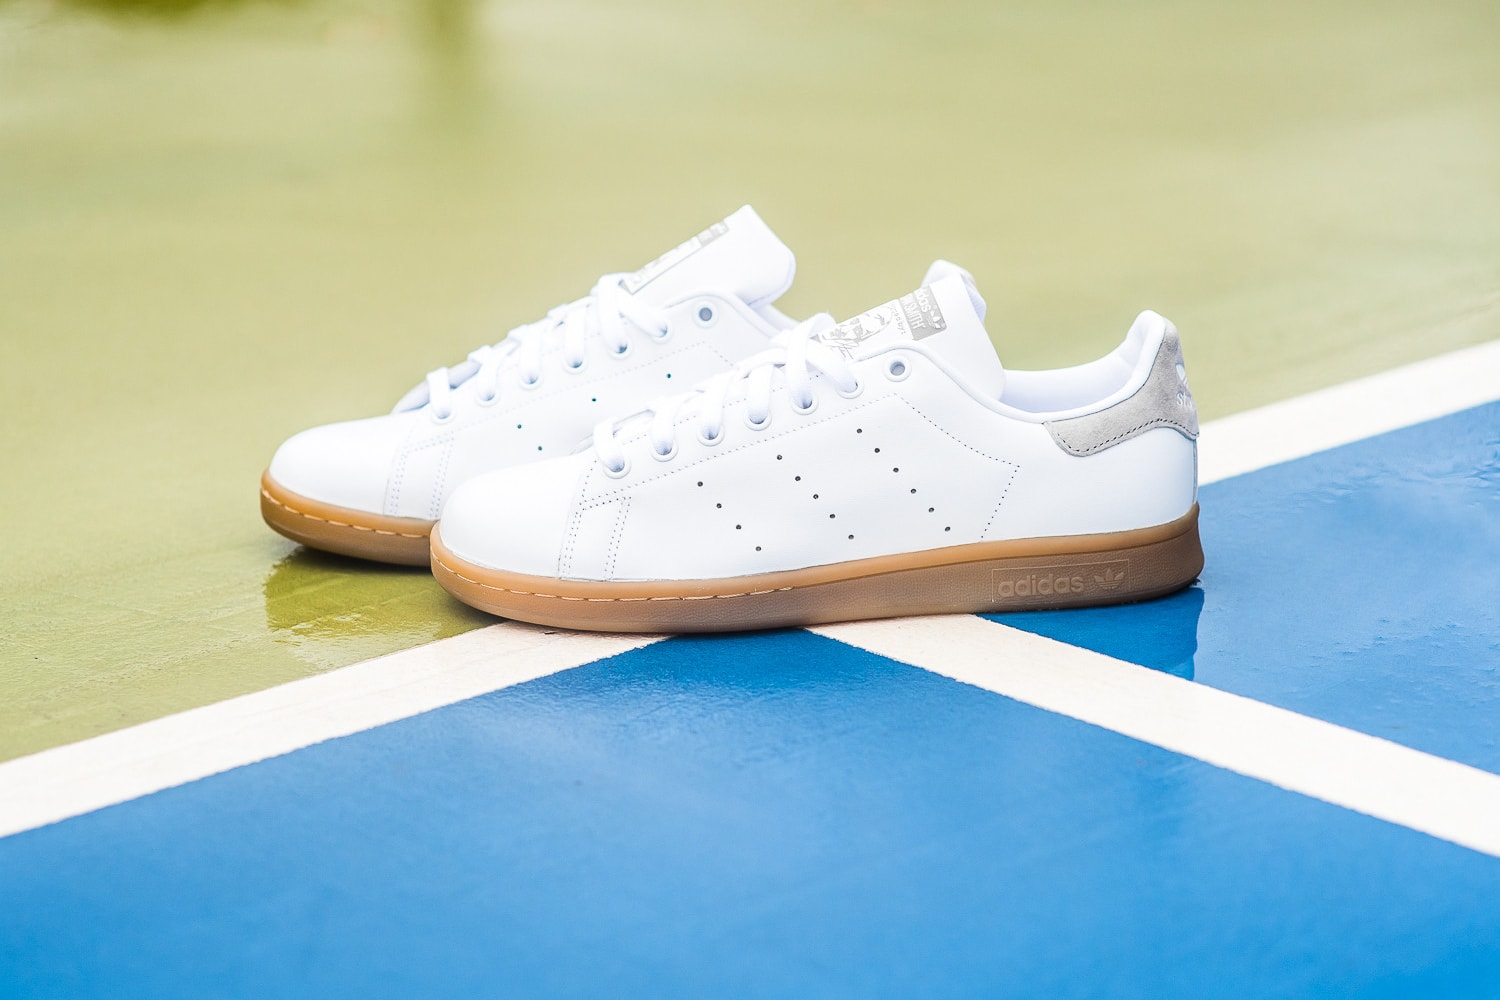 Adidas Originals Stan Smith Sneakers in White and Light Blue